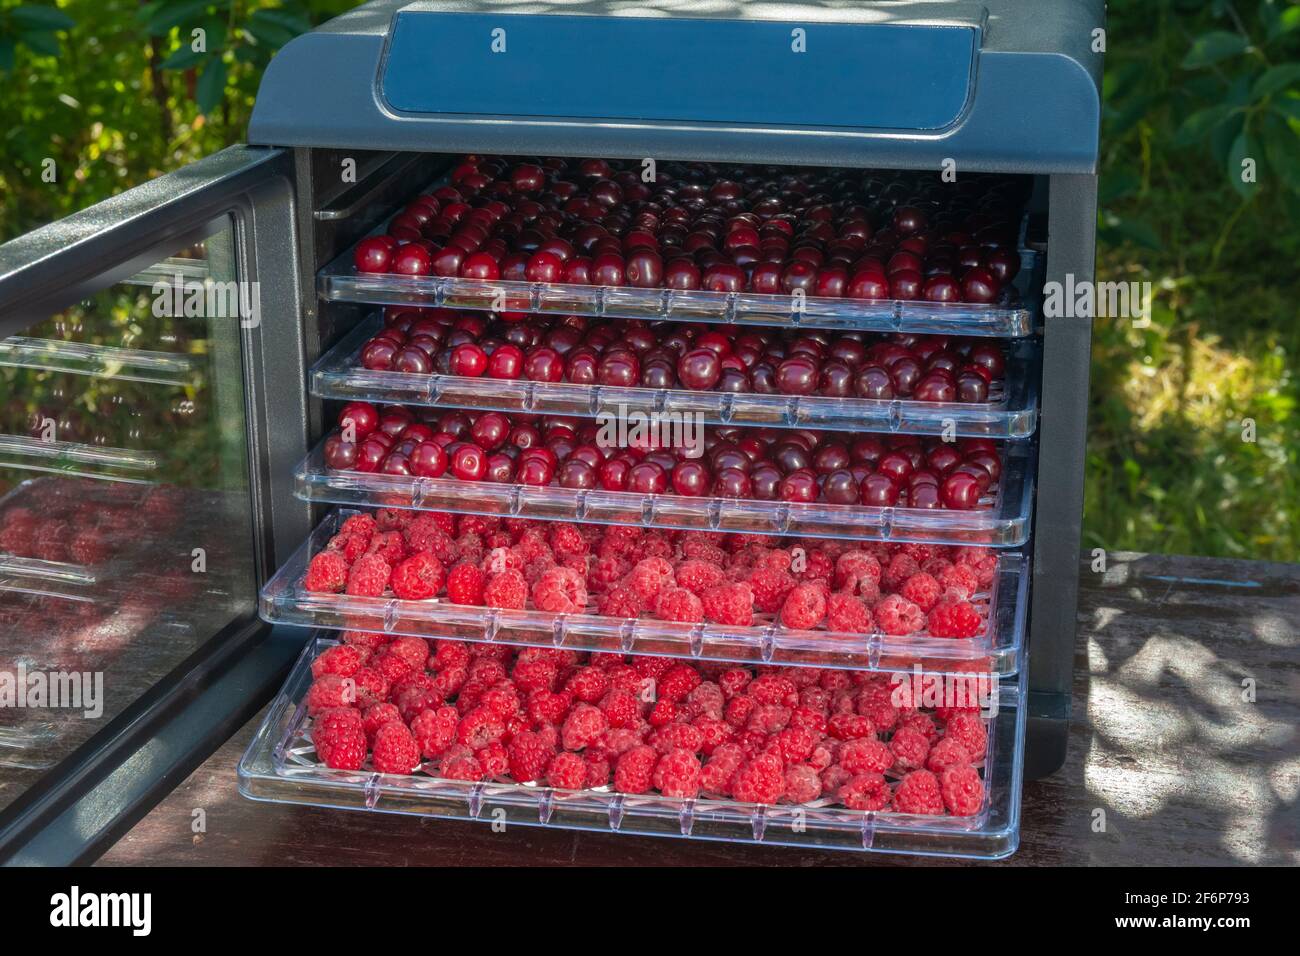 Fresh cherries and raspberries ready for dehydration in an electric drying machine for home drying of fruits and berries. Stock Photo